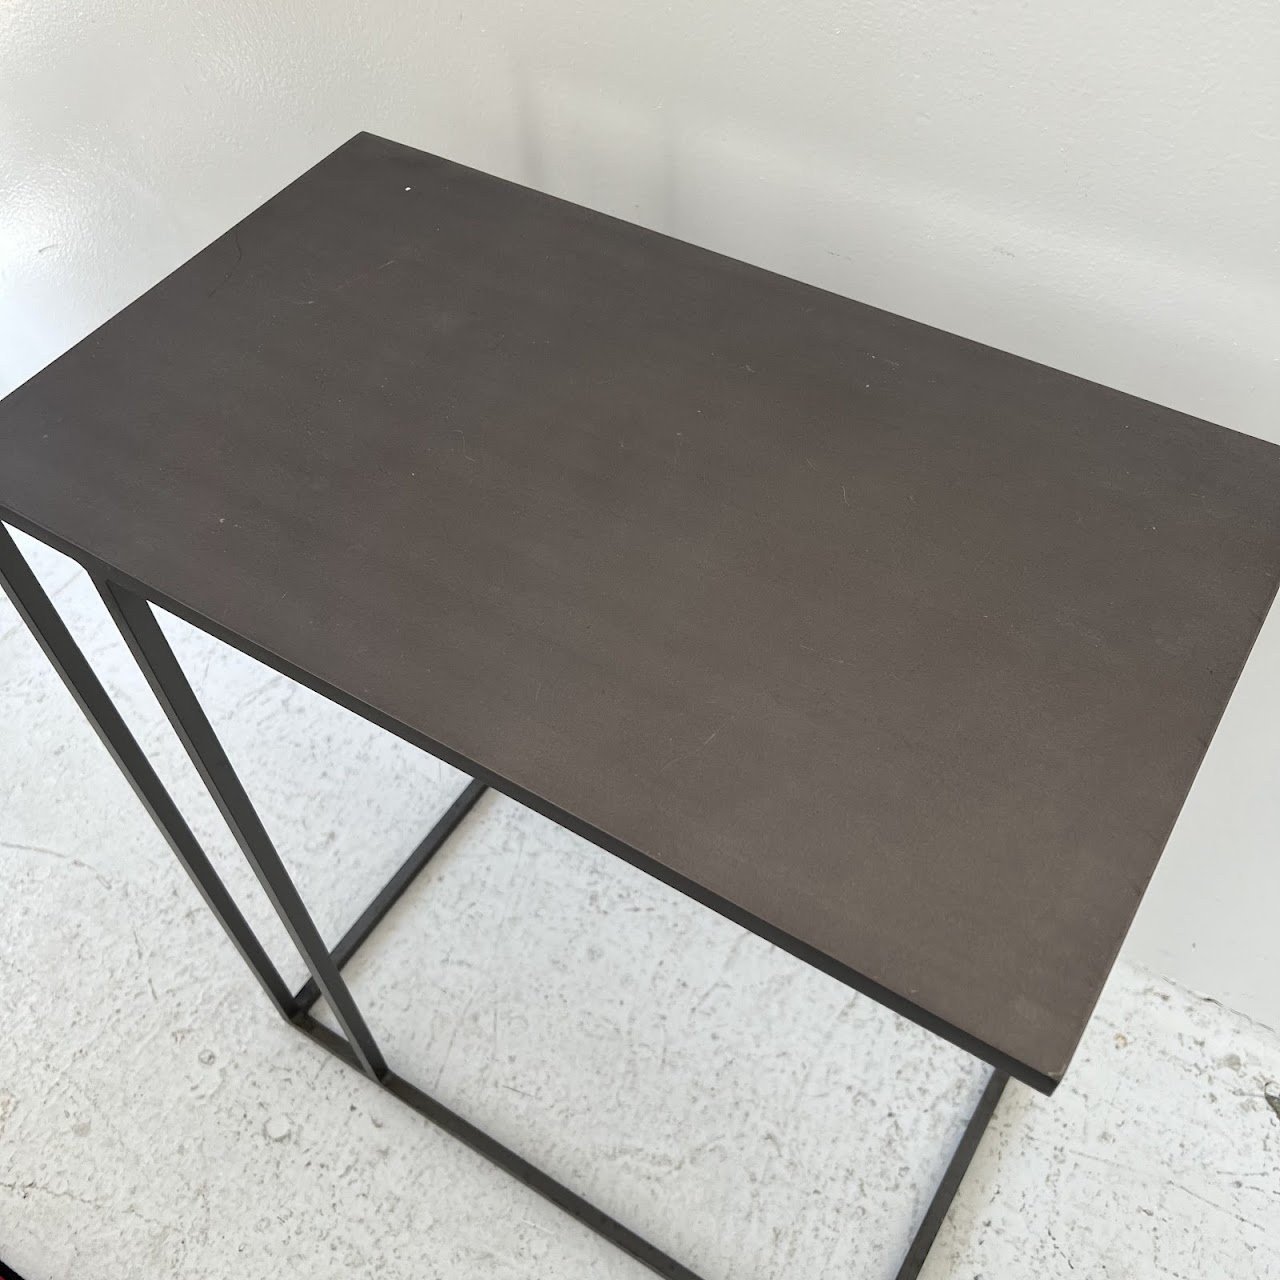 CB2 Cantilever Side Table